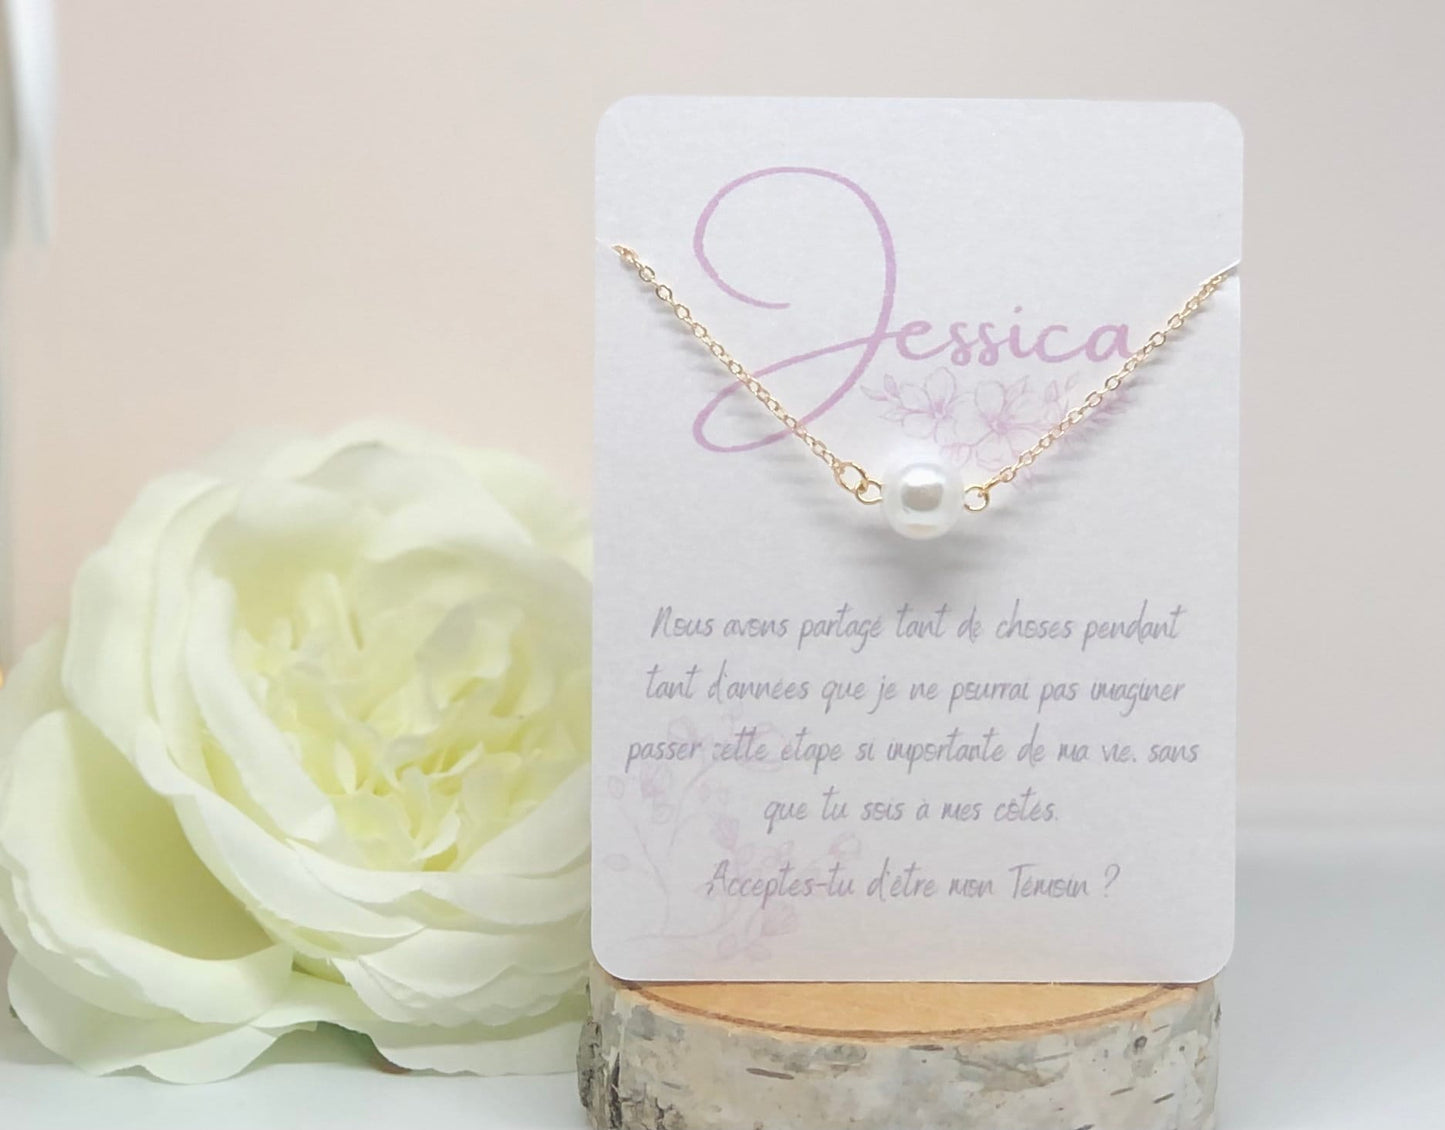 Necklace and personalized card for wedding witness request, bridesmaid